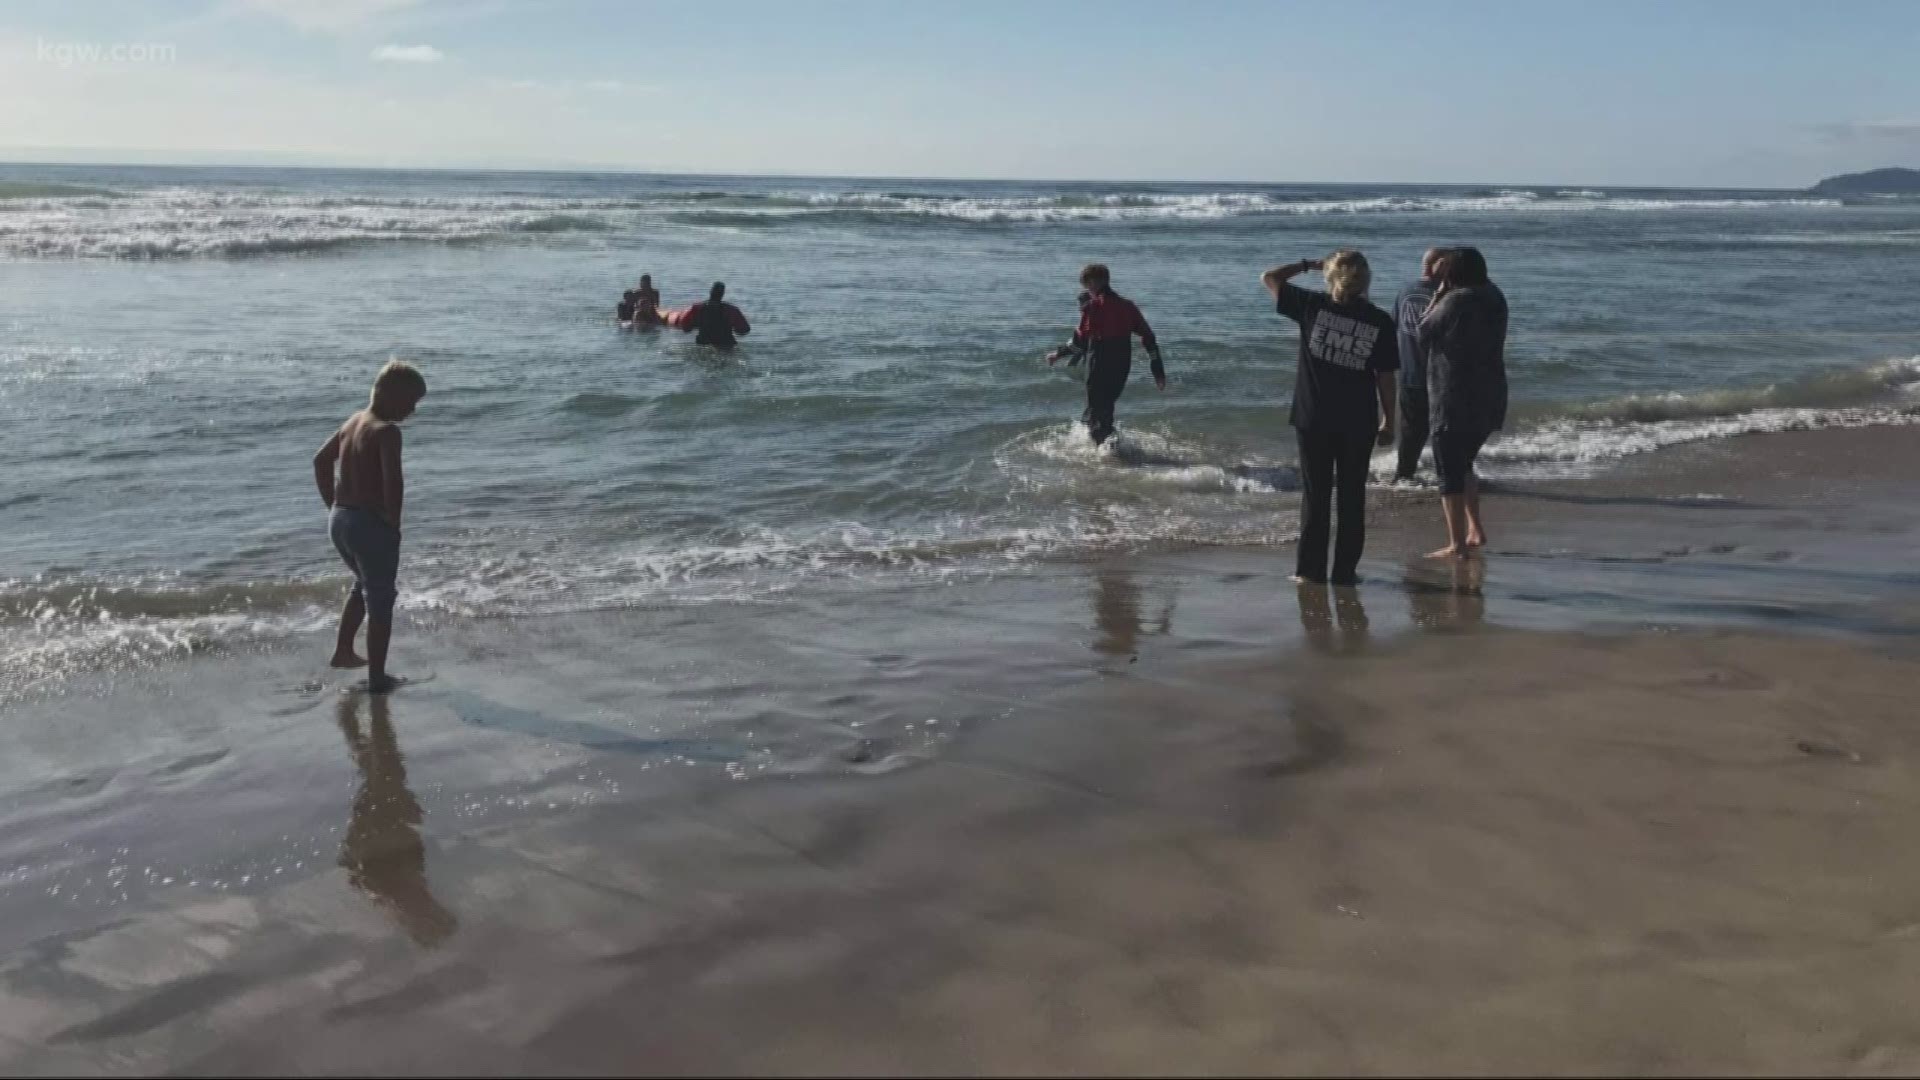 Four swimmers were rescued from the ocean at Rockaway Beach.